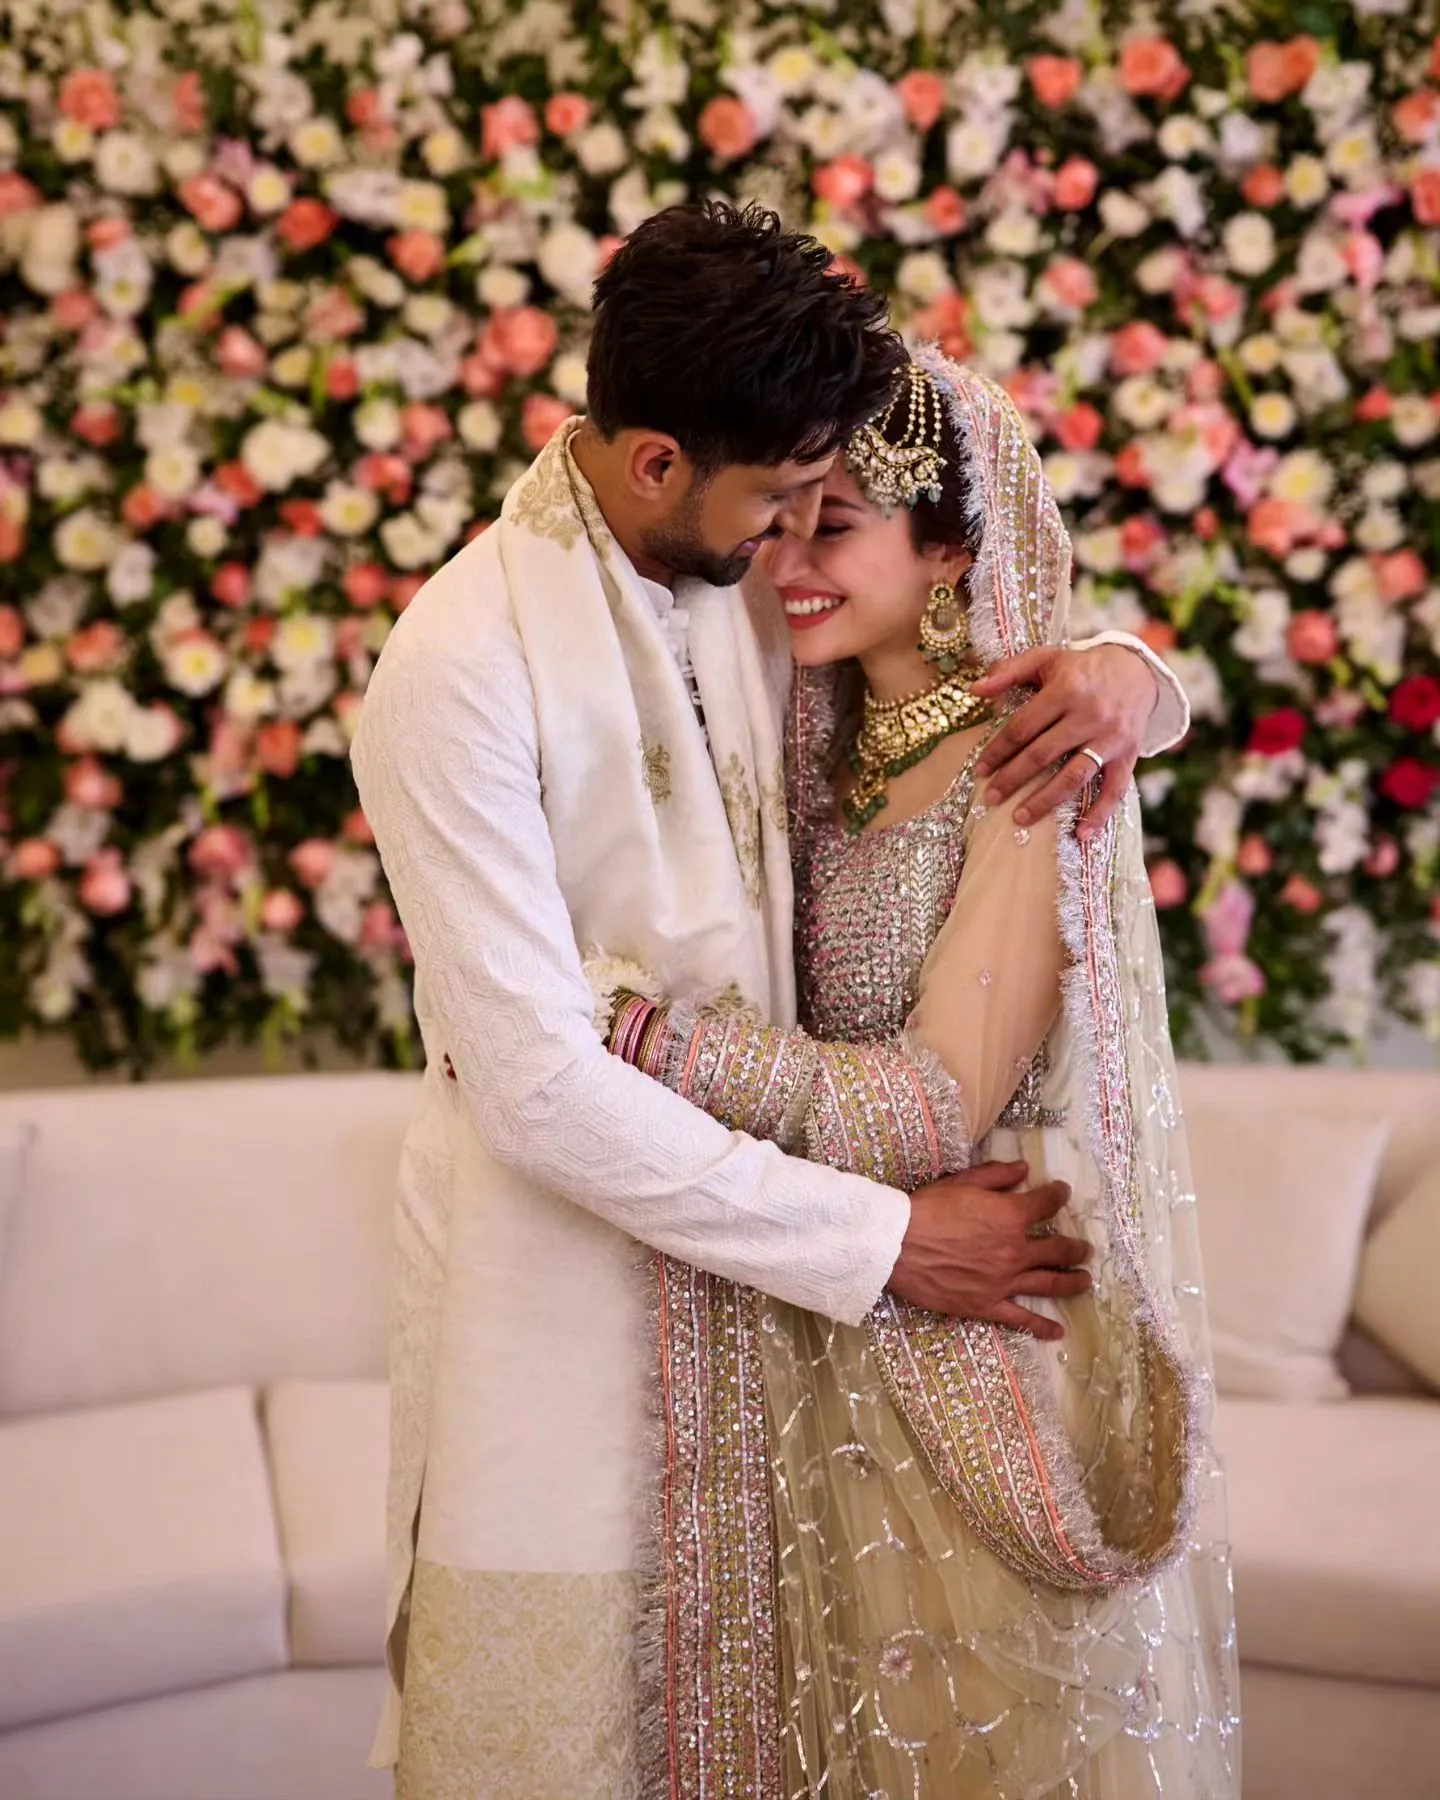 Sana Javed: Unveiling the Pakistani Actress Who Tied the Knot with Cricketer Shoaib Malik